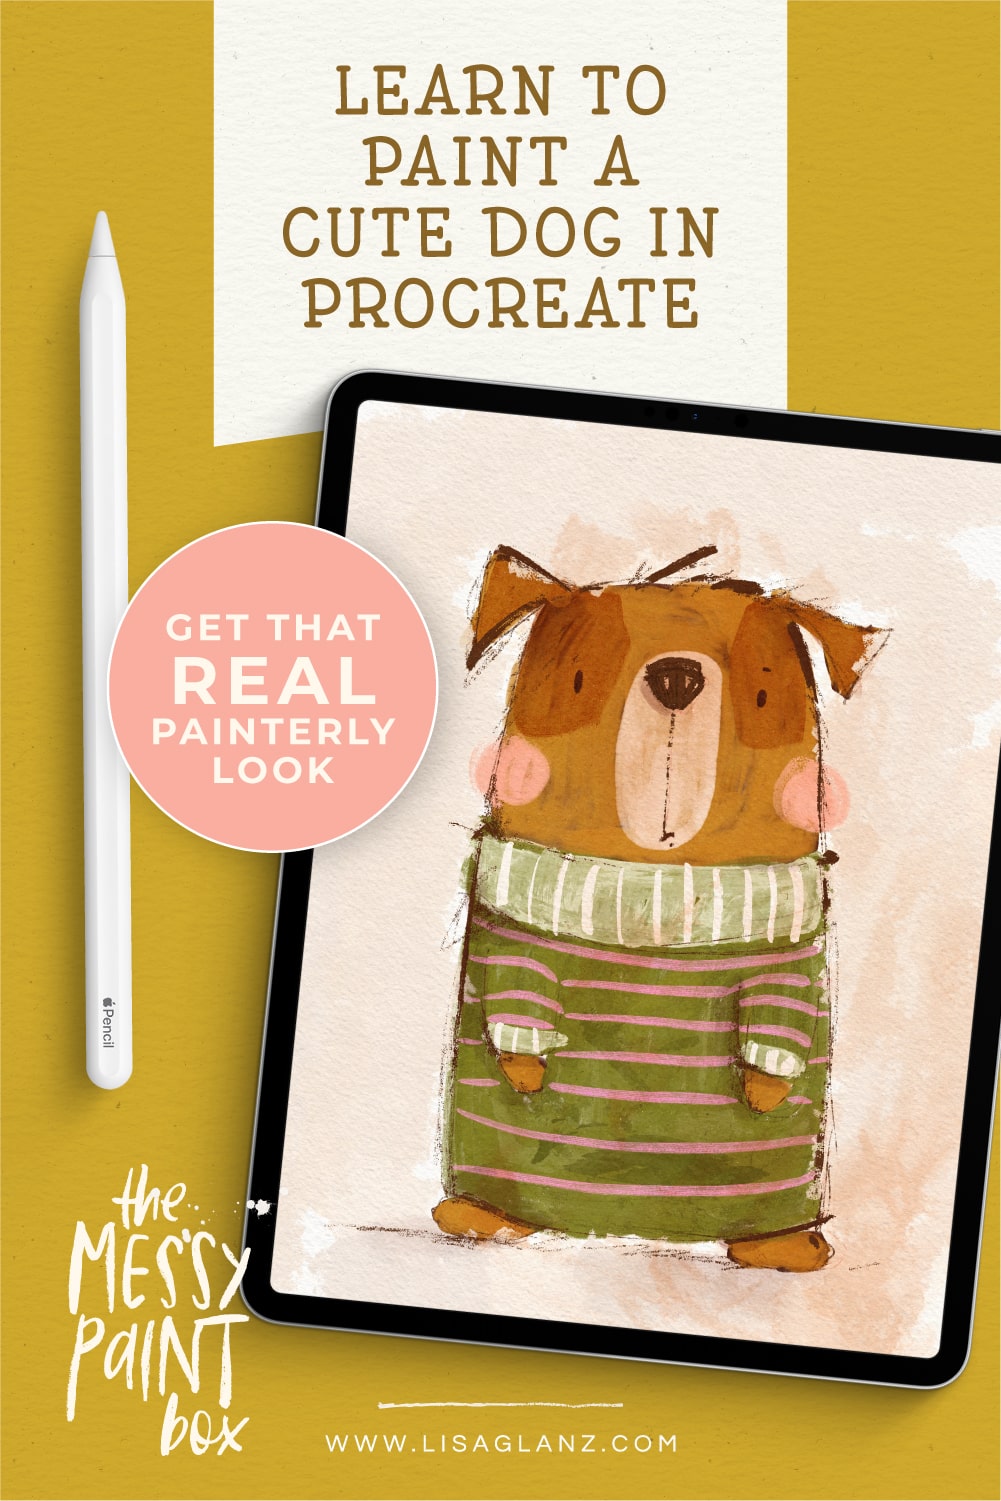 How to paint a cute dog in Procreate – digital painting tutorial